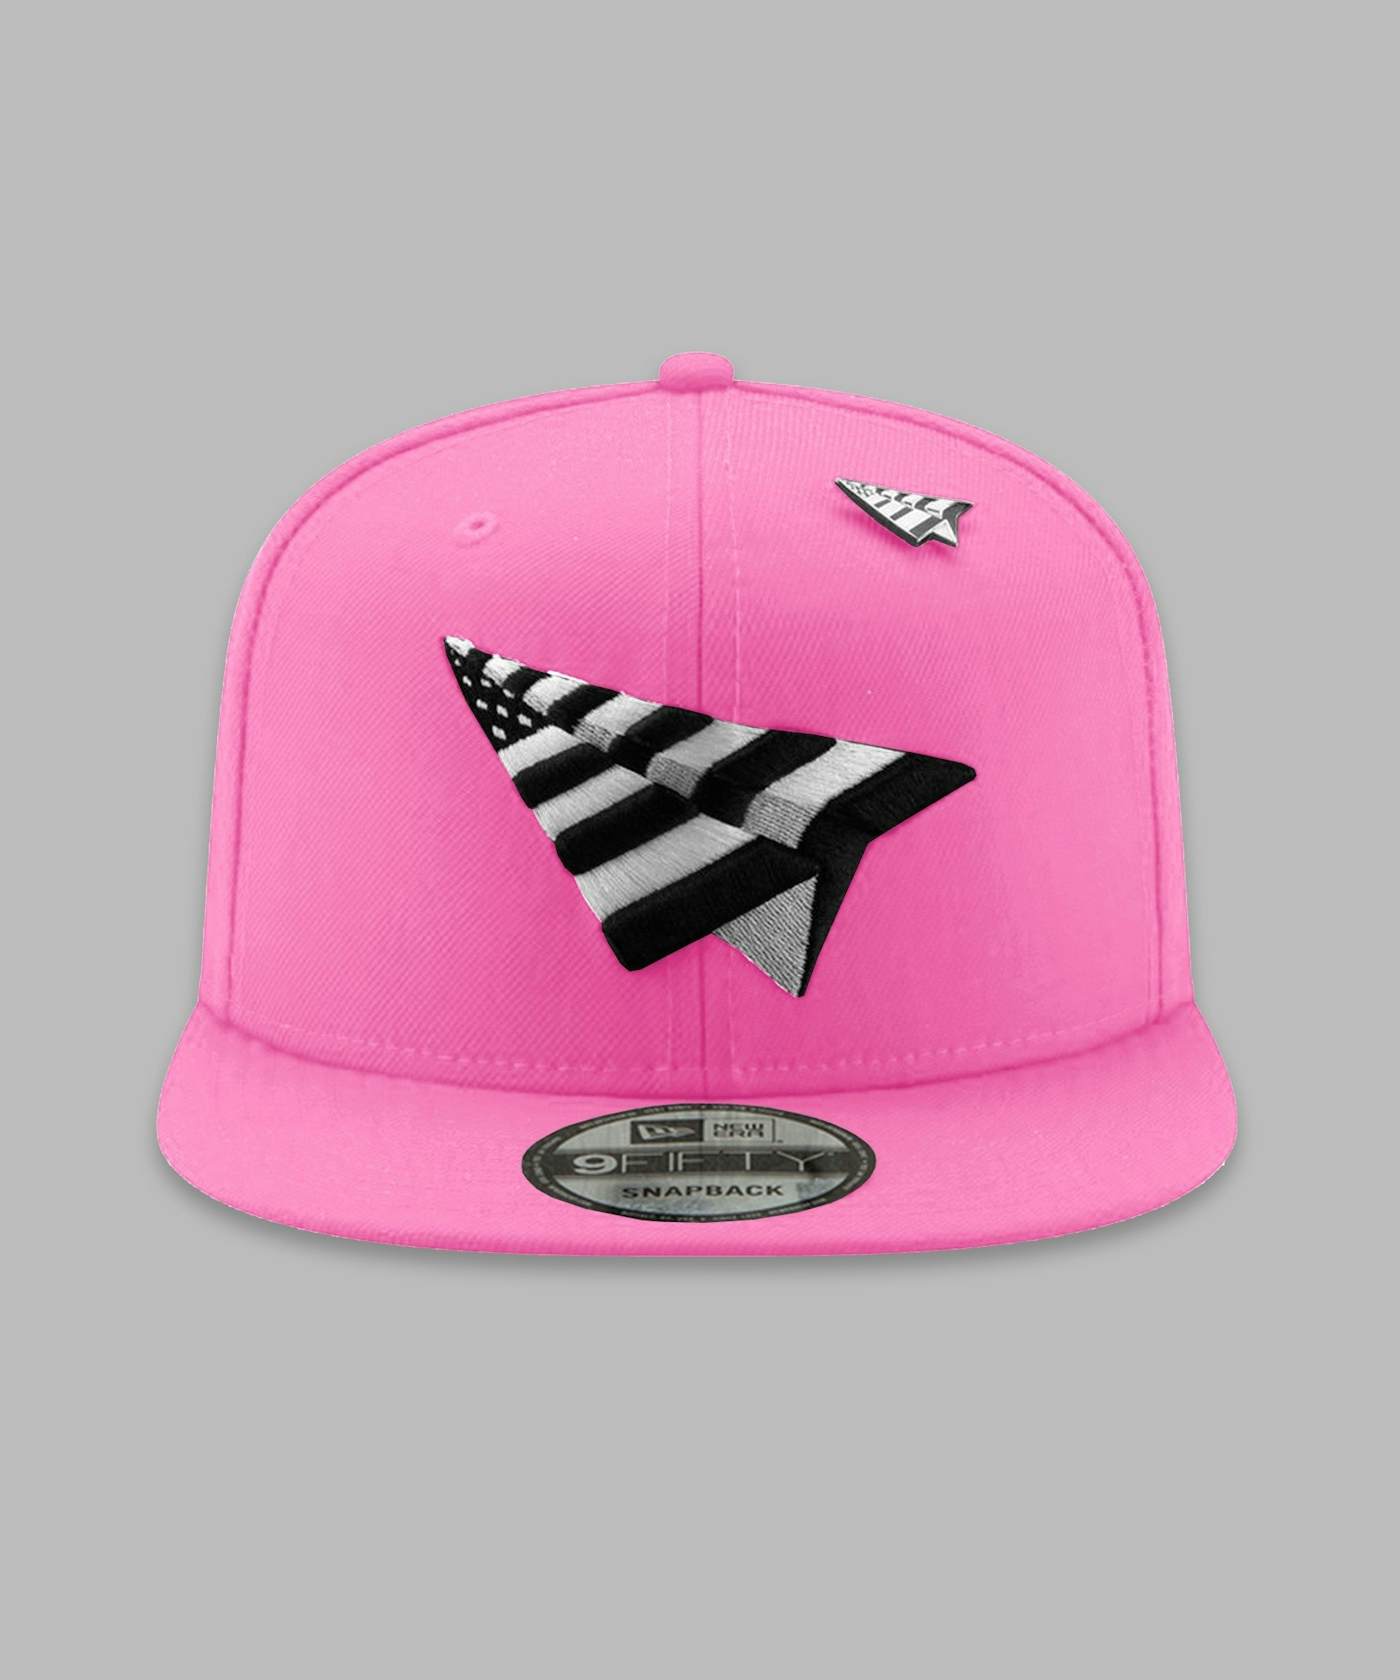 Snapback II High On Hat 9Fifty Crown The Pink Run